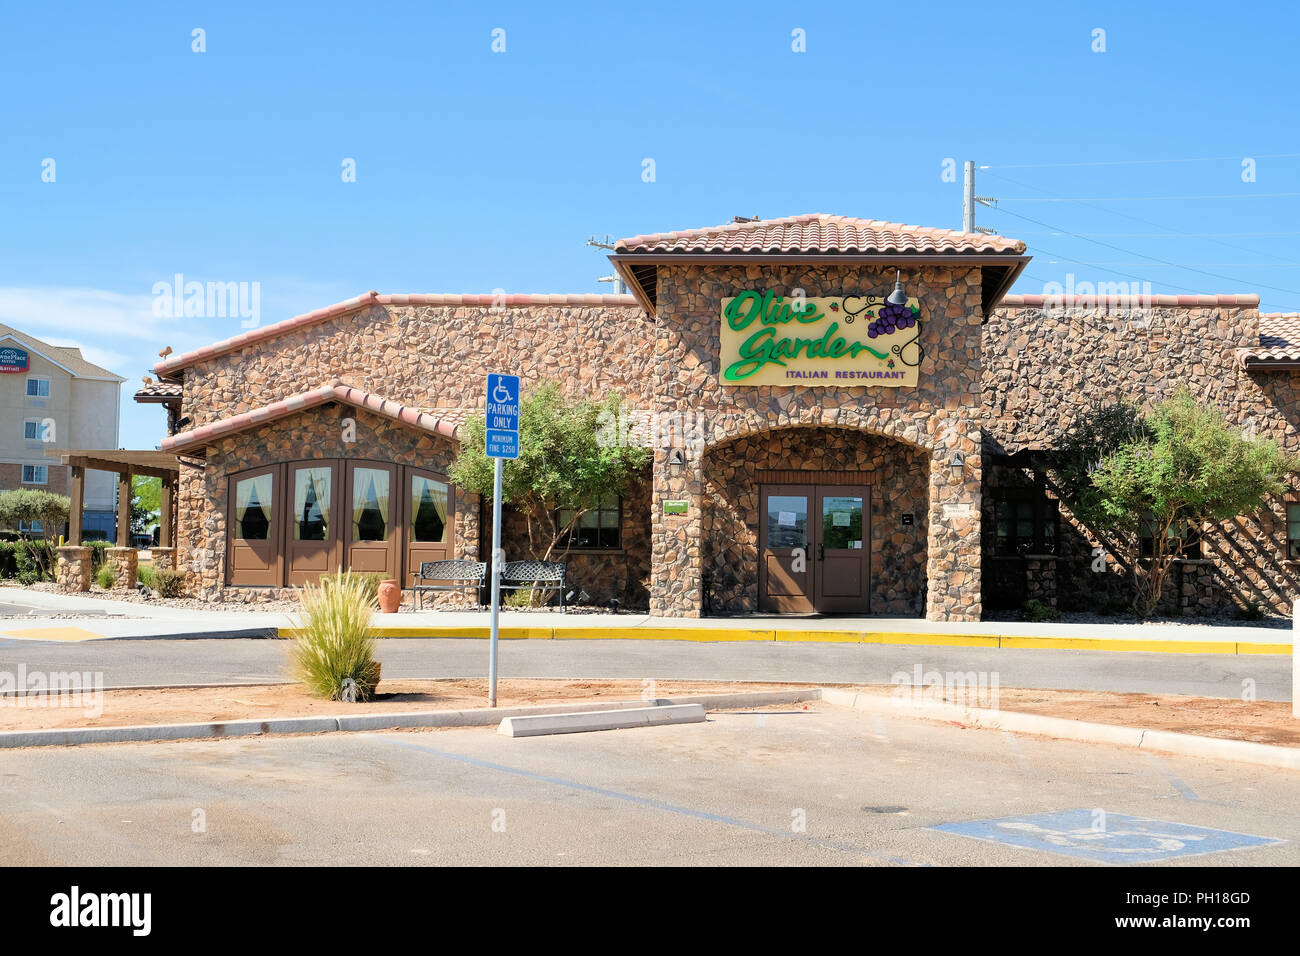 Olive Garden Italian Restaurant High Resolution Stock Photography And Images Alamy